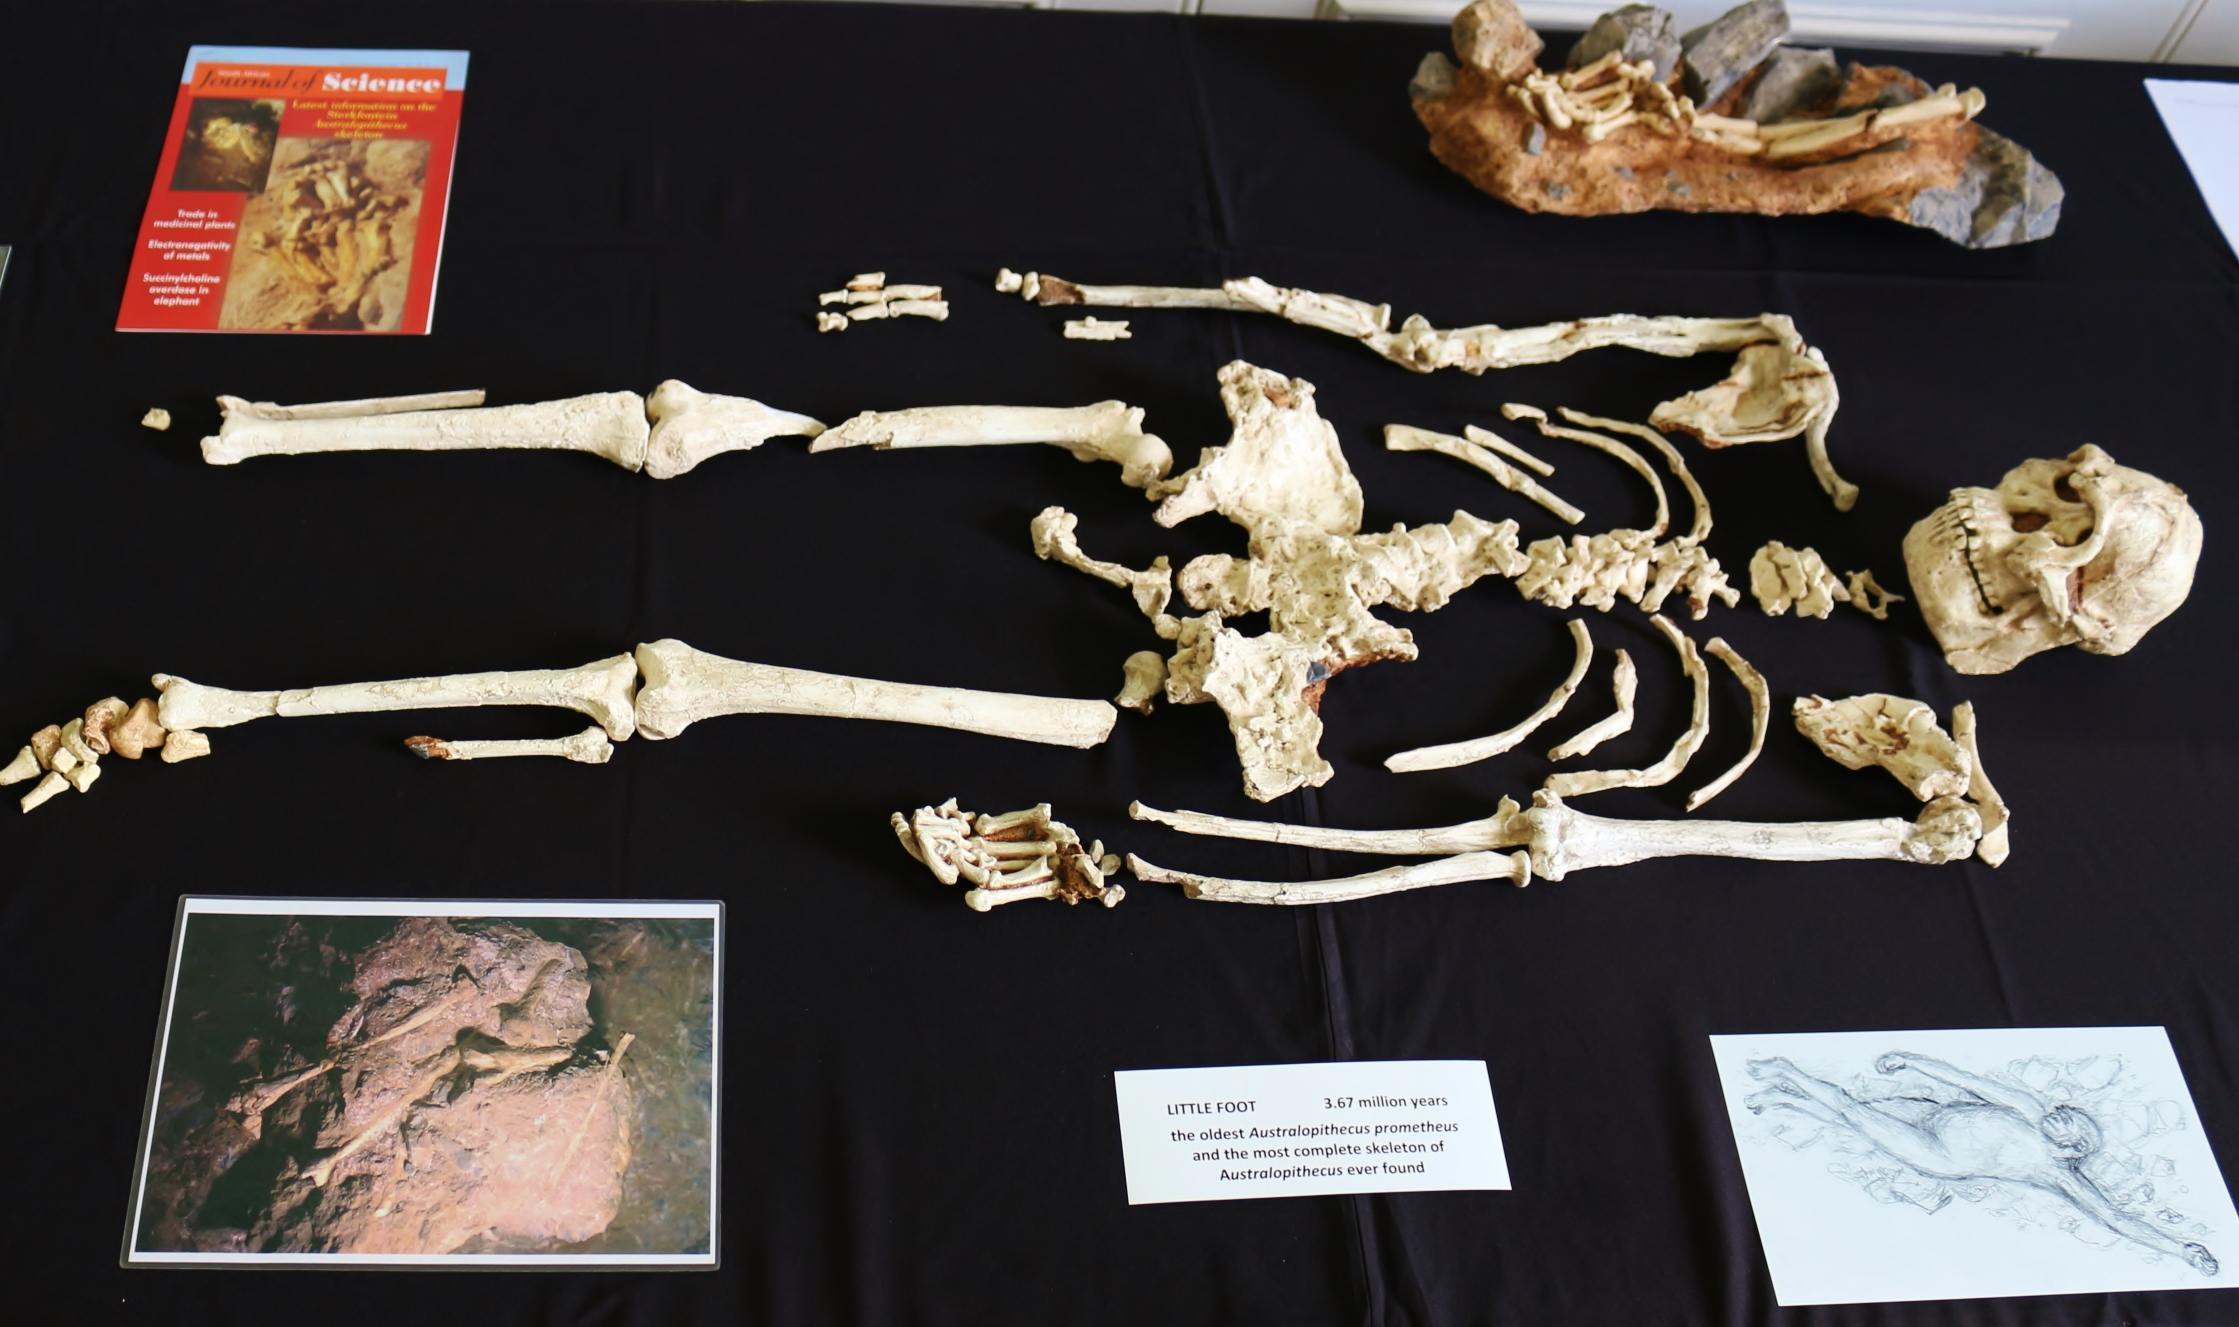 Little Foot: An intriguing 3.6 million years old human ancestor 3